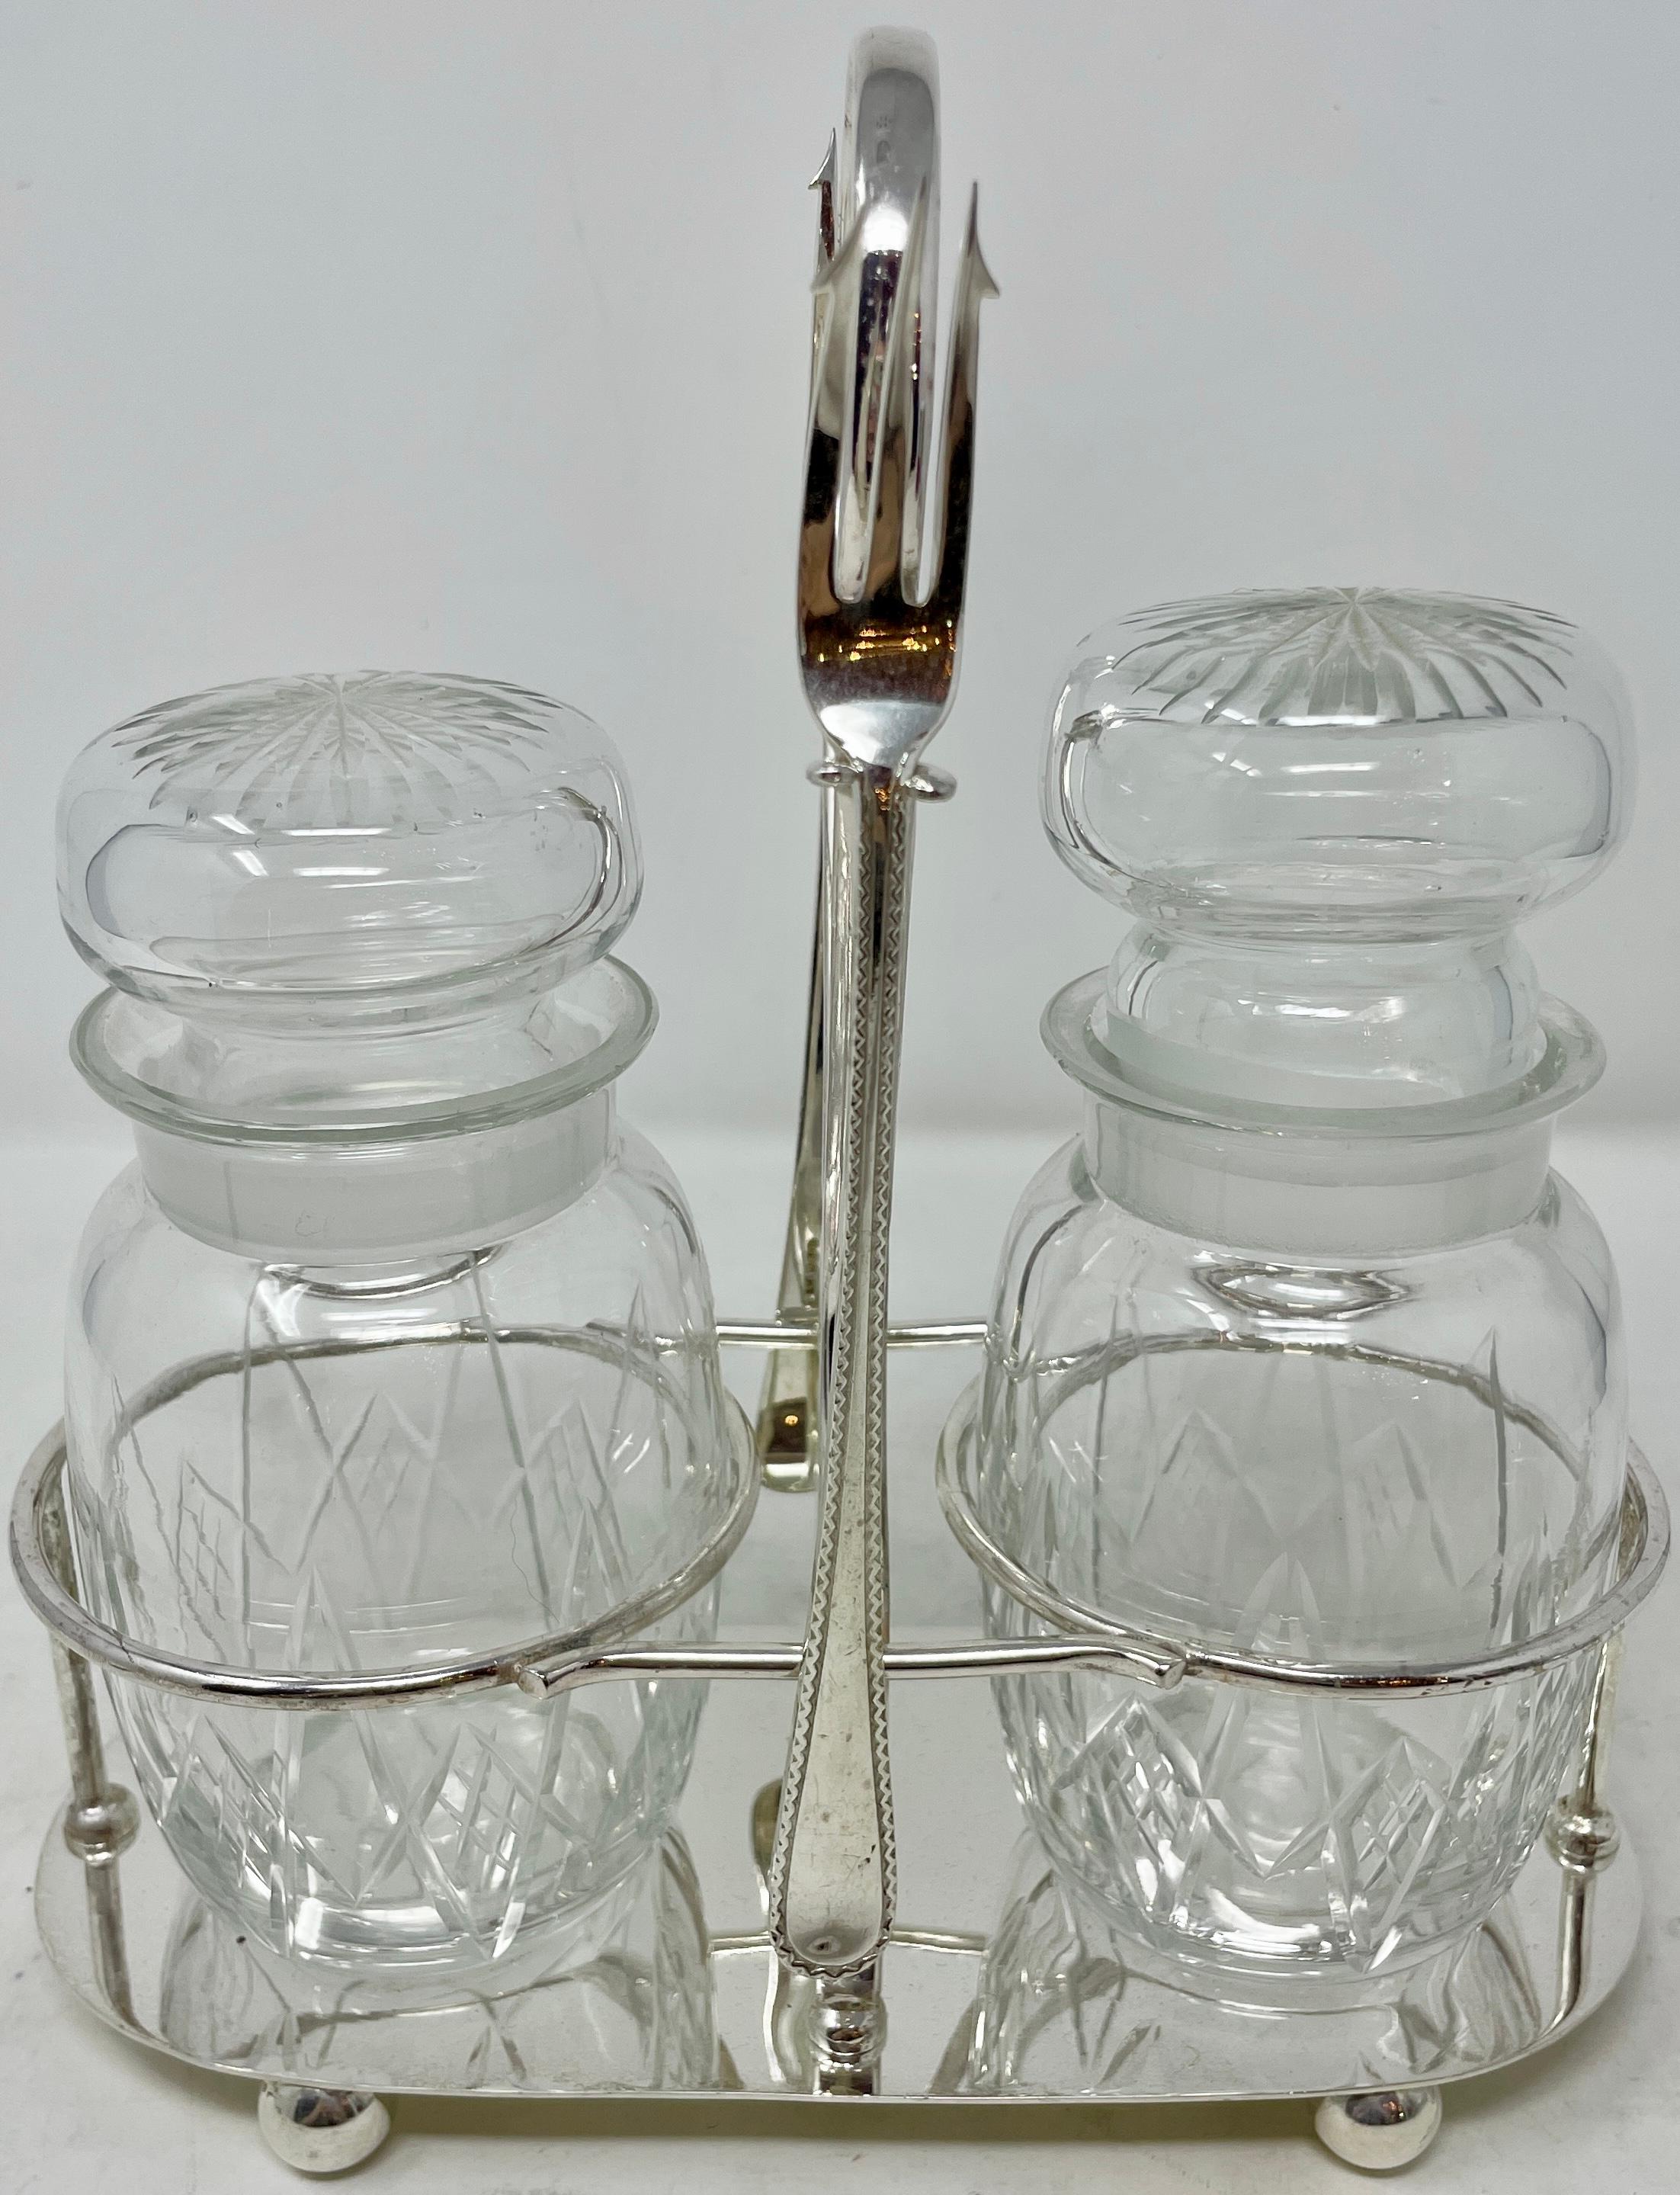 Antique English silver-plated double pickle castor with crystal jar & forks, circa 1900-1910.
Includes handled stand, 2 jars with stoppers and 2 pickle forks.